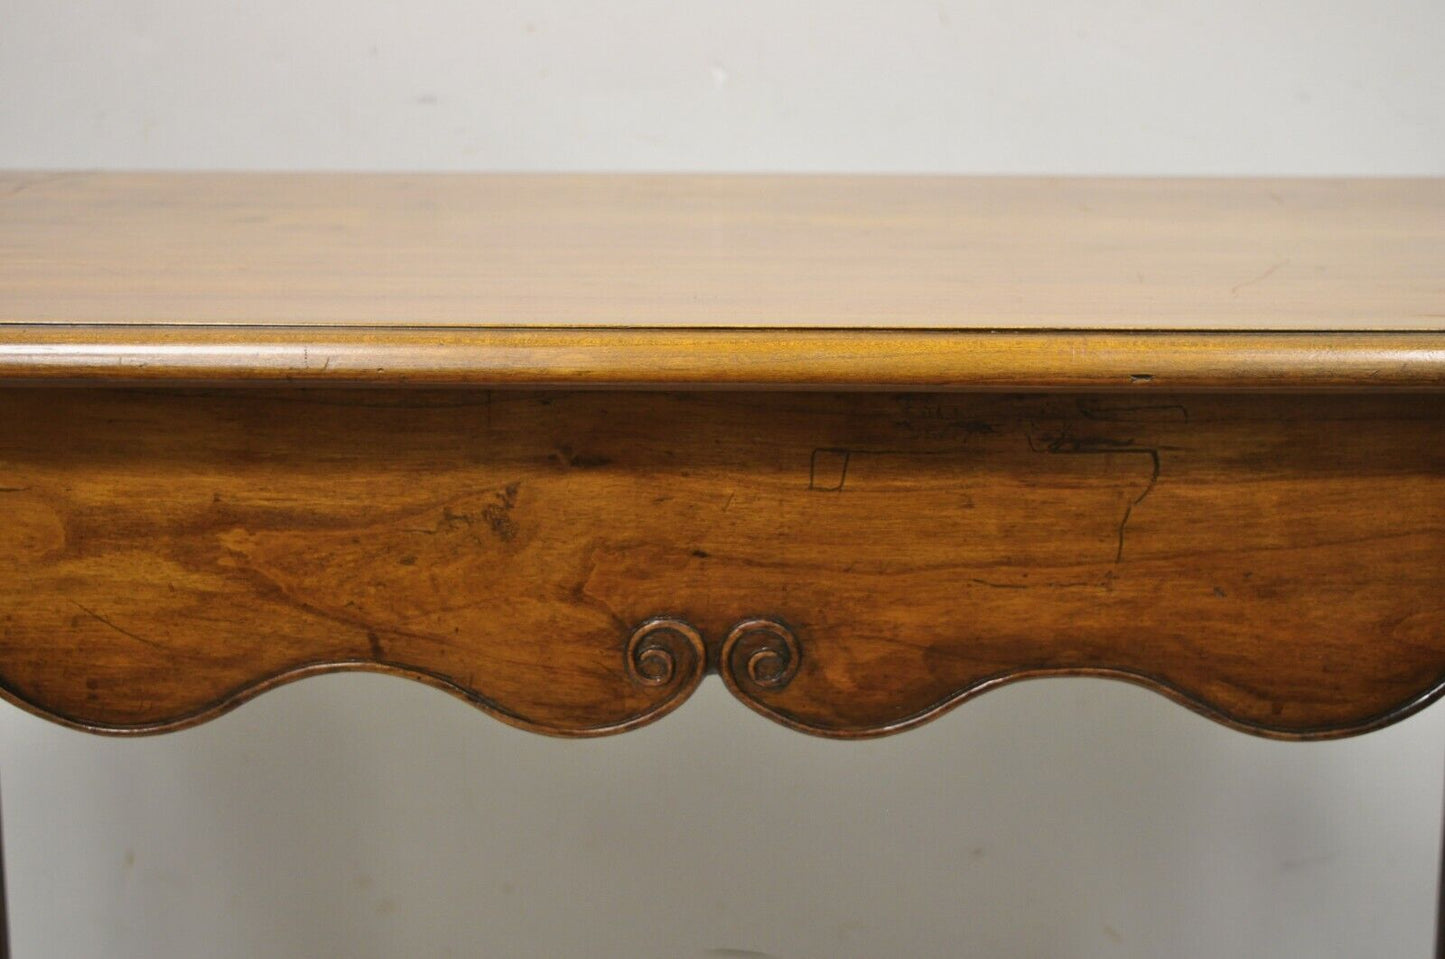 Antique Italian Provincial Carved Distressed Cherry Saber Leg Desk Console Table